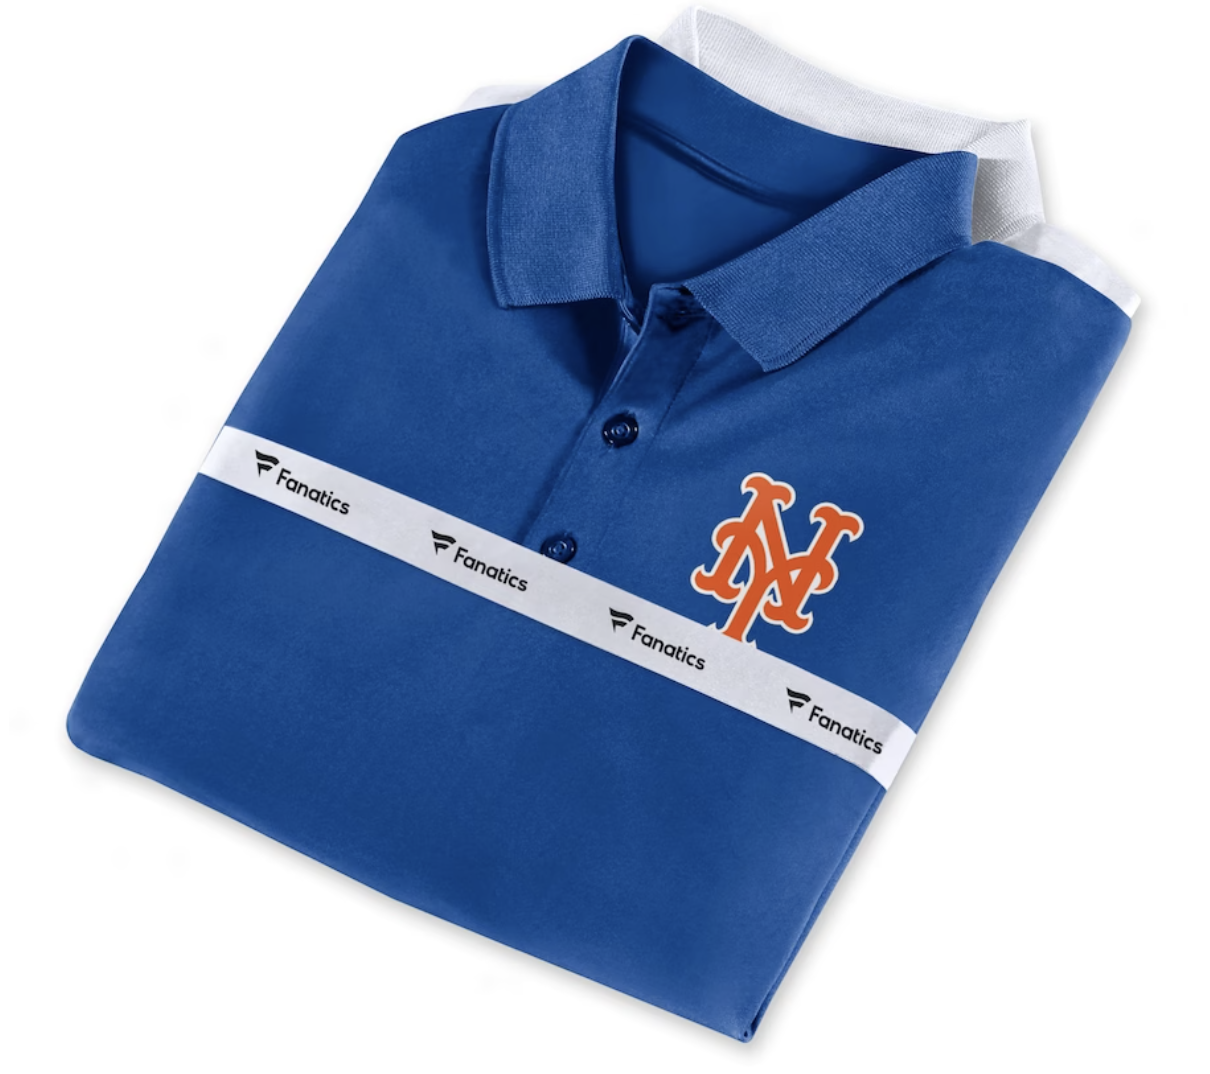 Pete Alonso New York Mets Nike 2022 MLB All-Star Game Name & Number T-Shirt  - White